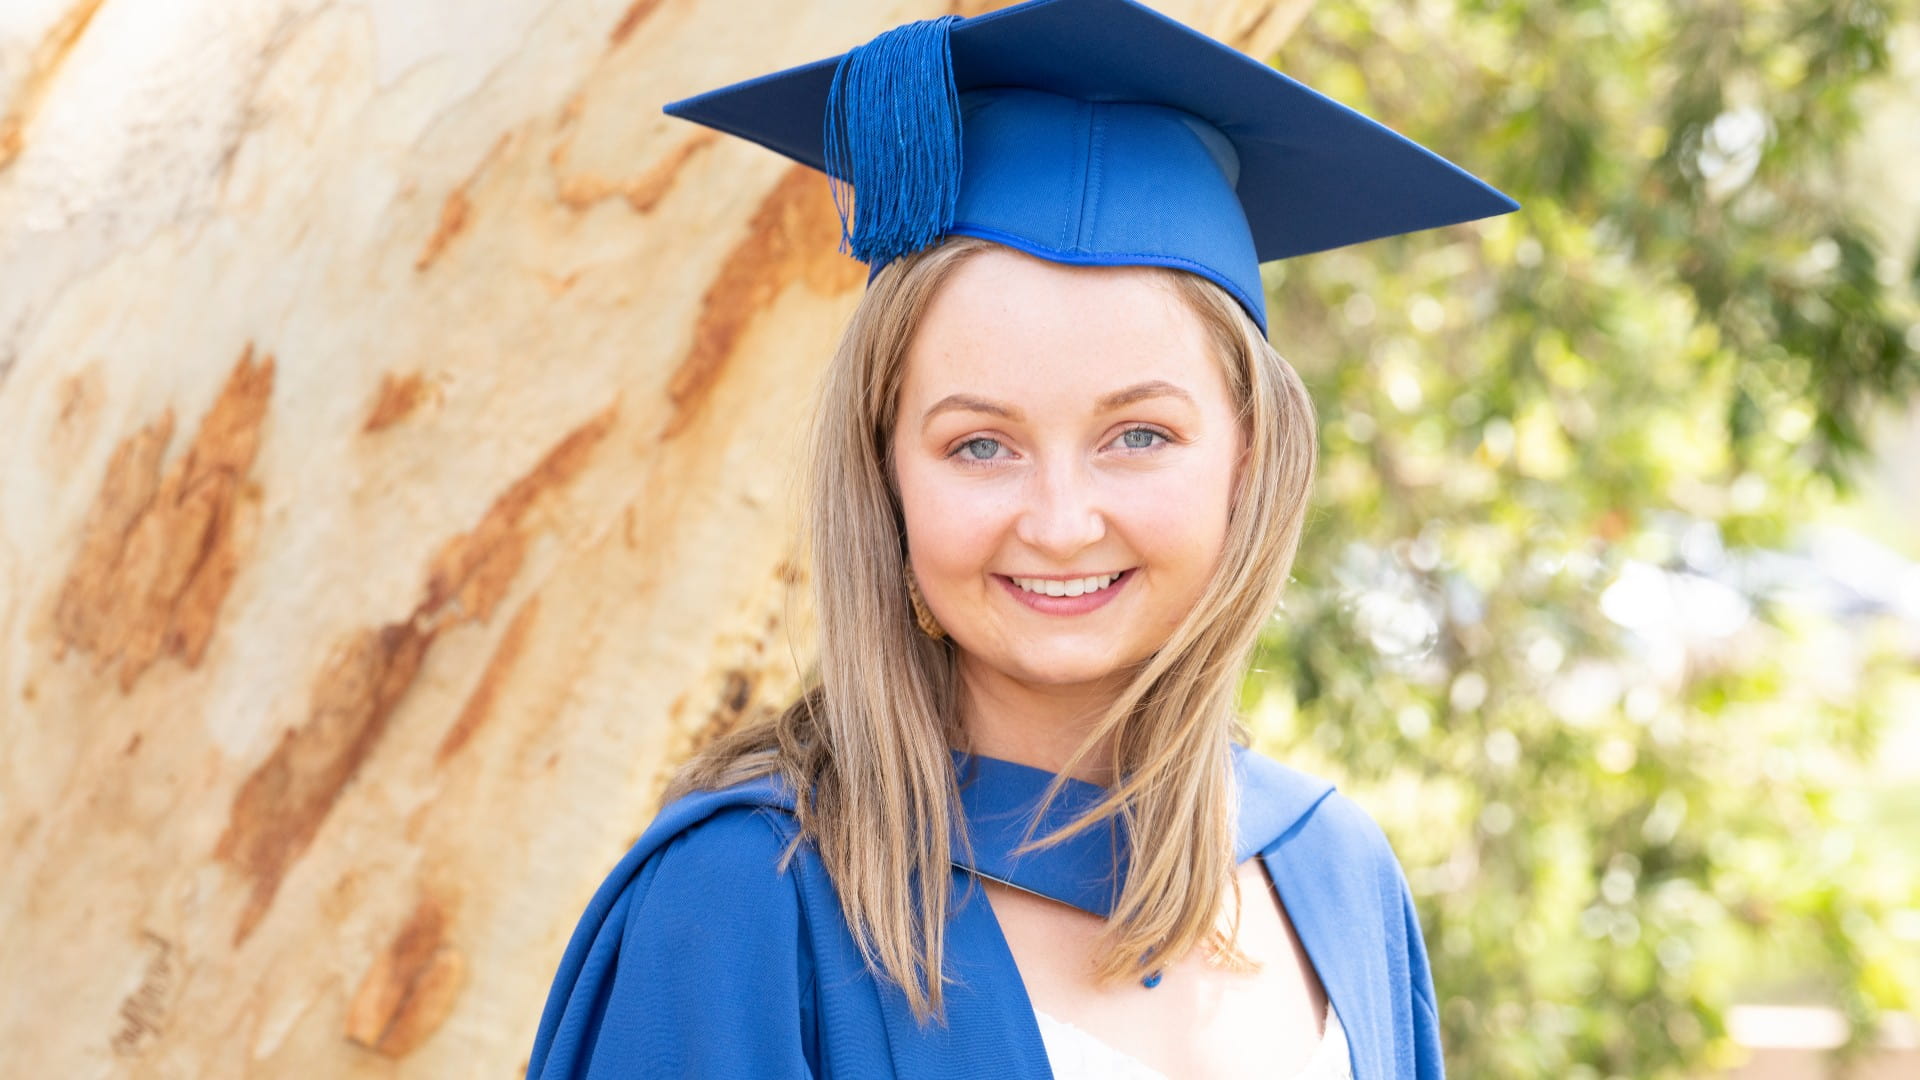 Emily Nield wears a blue cap and gown and stands in front of a tree. She is smiling. Photo: Paul Jones